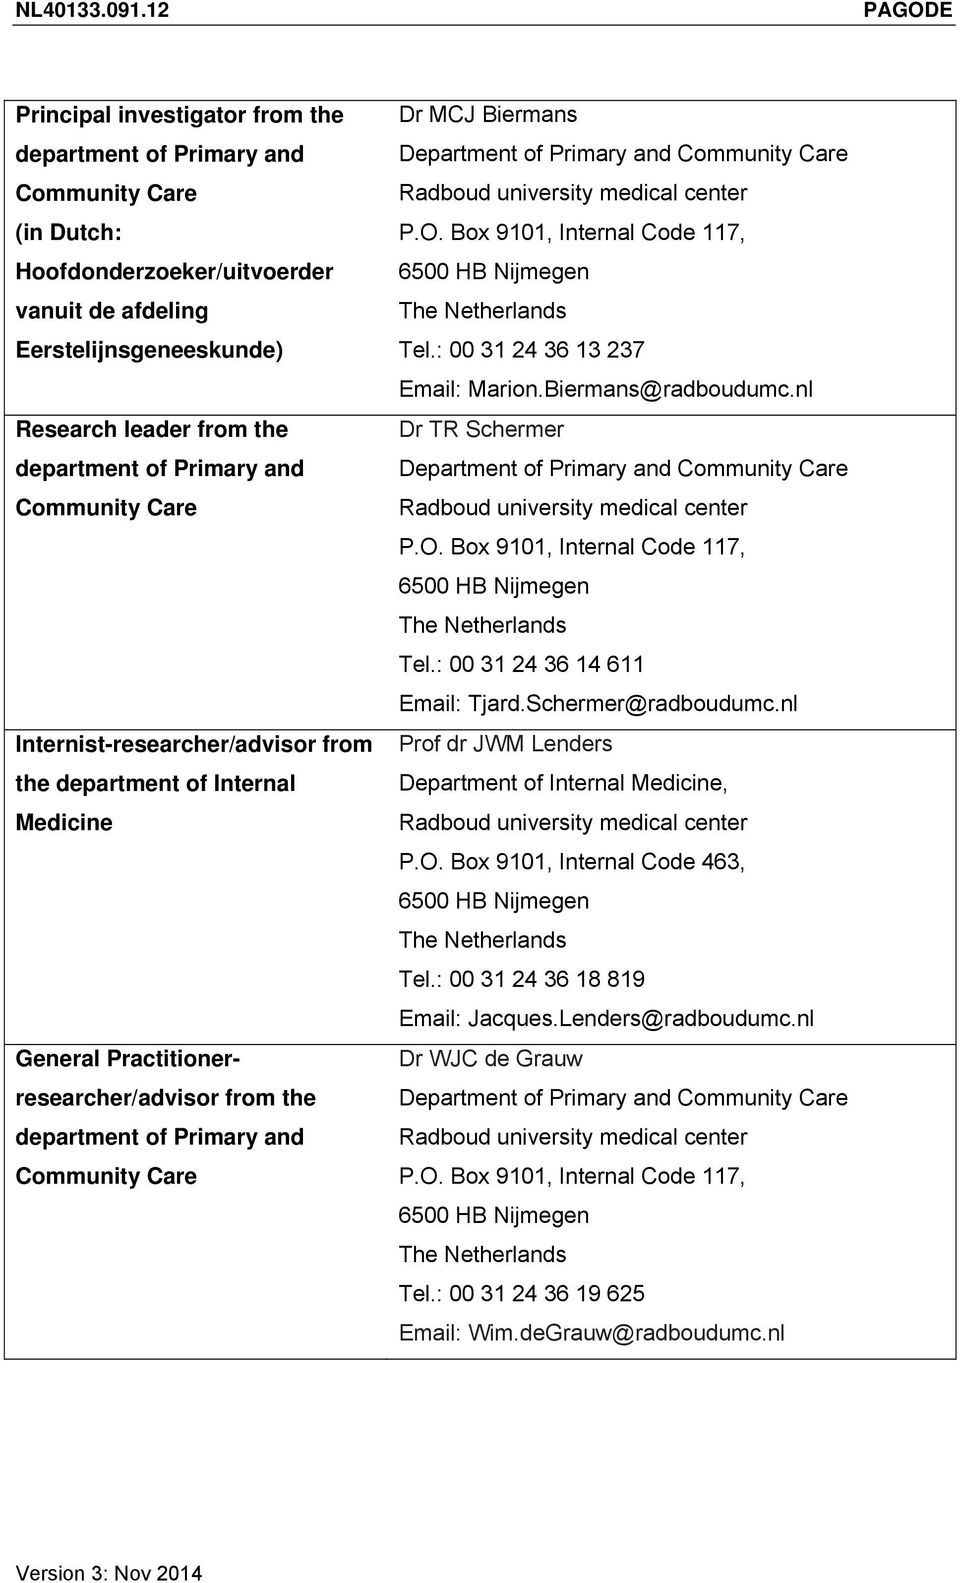 department of Primary and Community Care Internist-researcher/advisor from the department of Internal Medicine General Practitionerresearcher/advisor from the department of Primary and Community Care